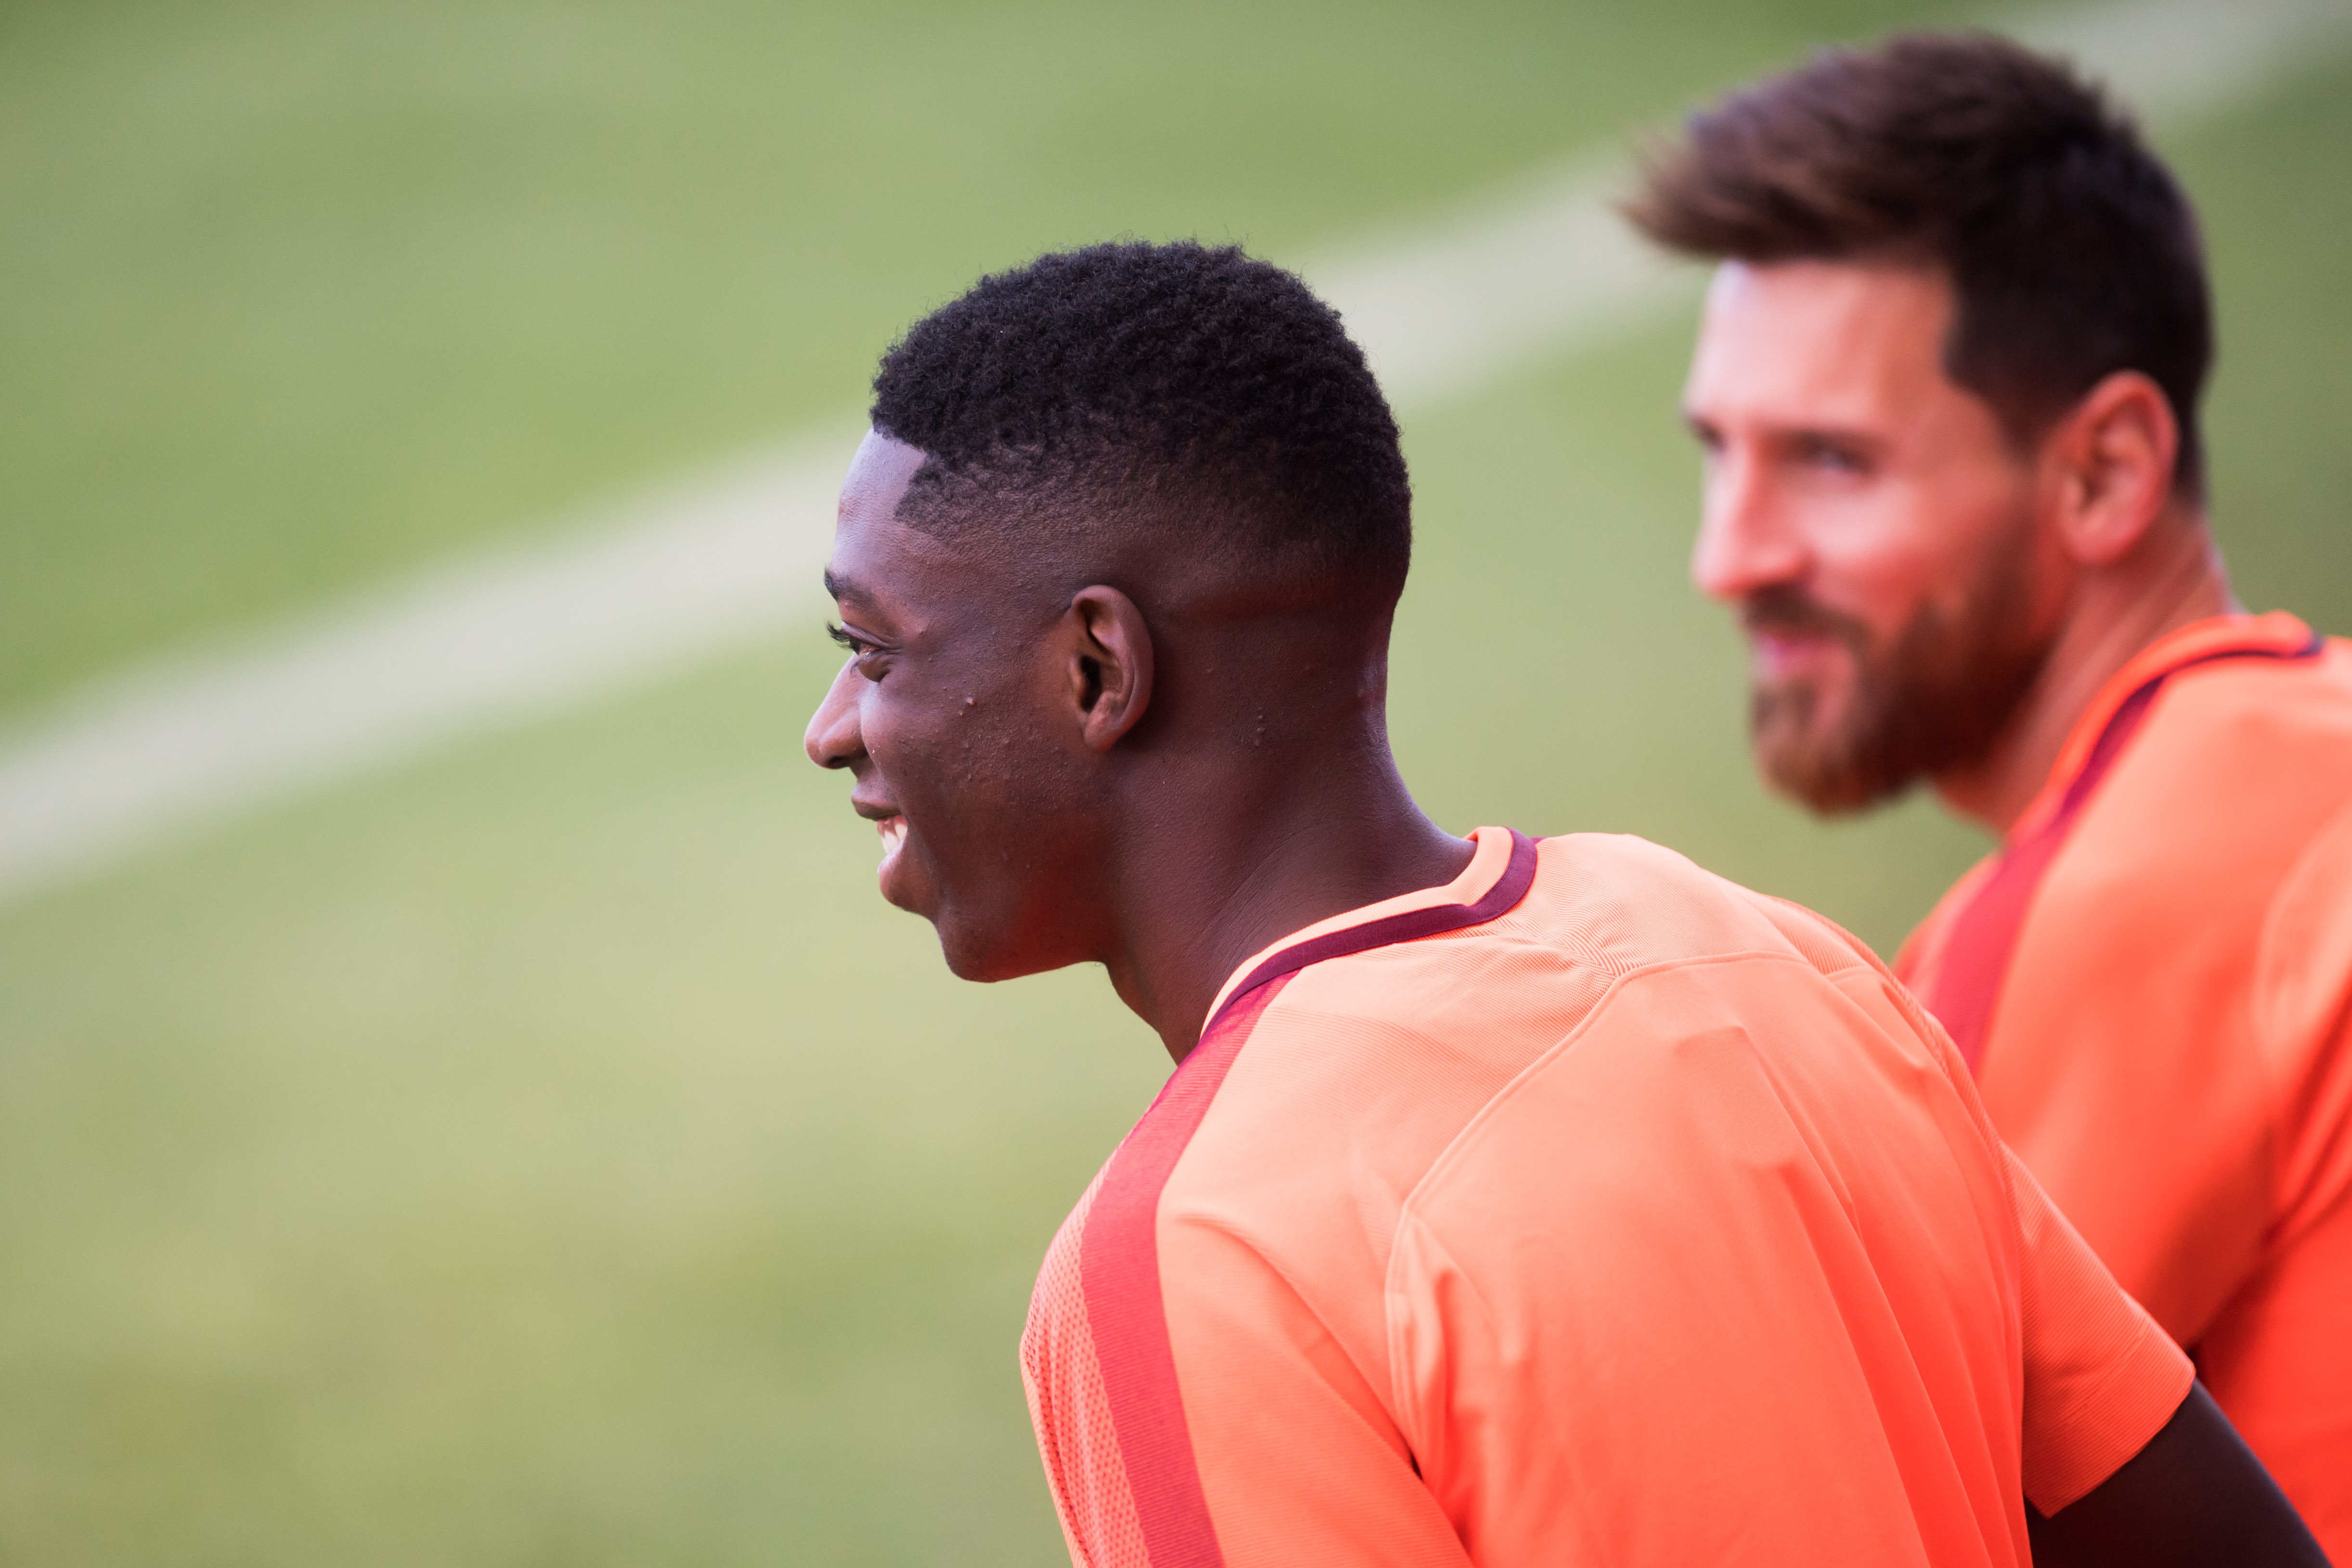 BARCELONA, SPAIN - SEPTEMBER 11: Ousmane Dembele of Lionel Messi of FC Barcelona enter the pitch during a training session ahead of the UEFA Champions League Group D match against Juventus on September 11, 2017 in Barcelona, Spain.  (Photo by Alex Caparros/Getty Images)